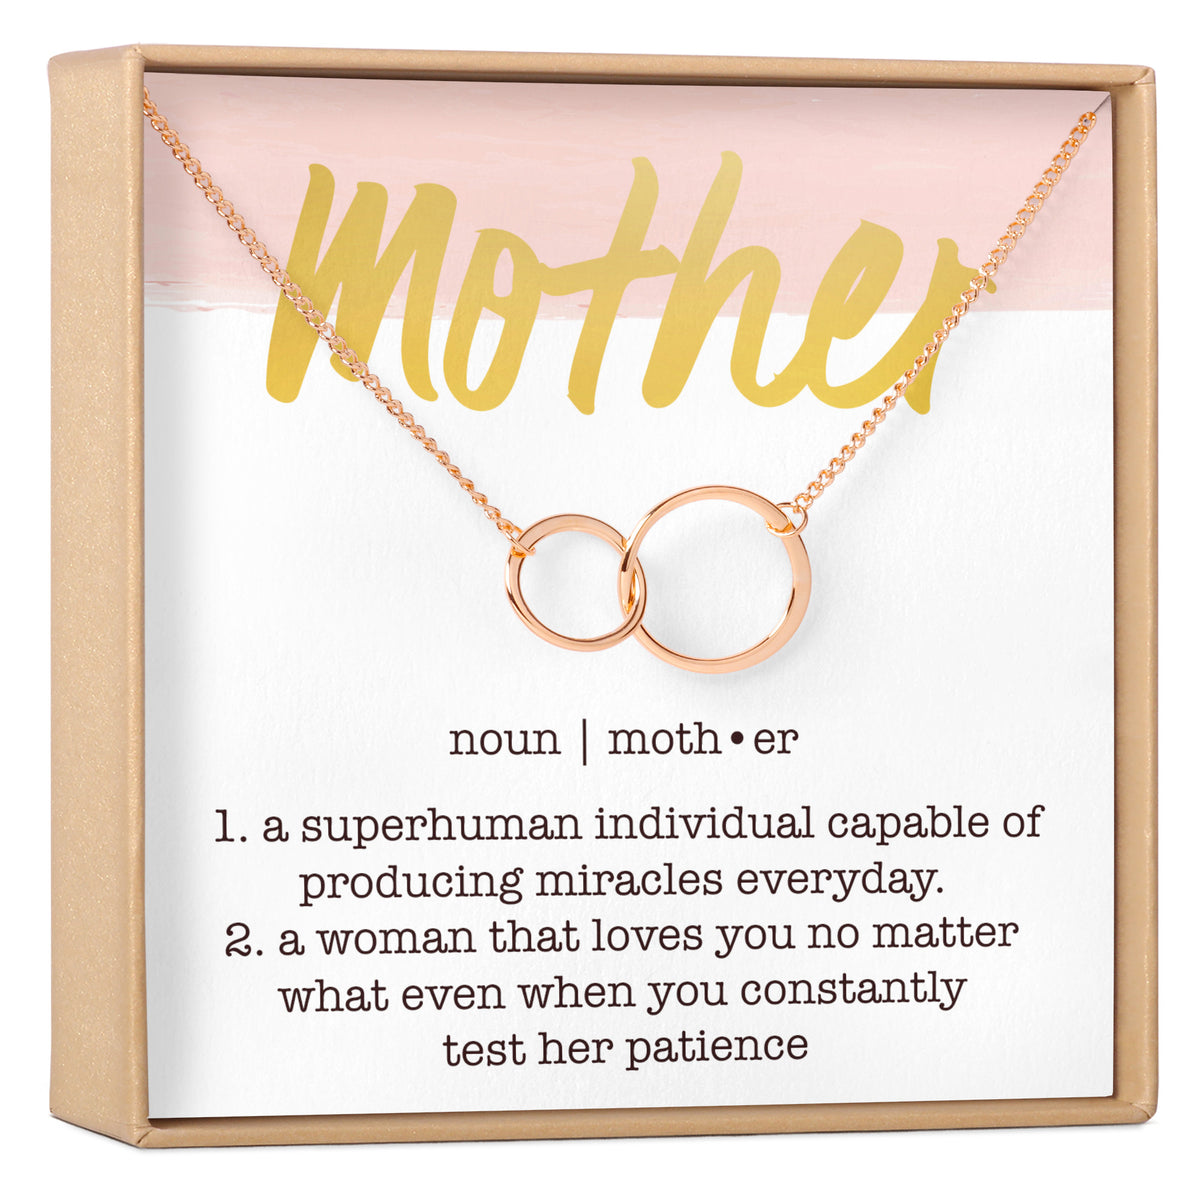 Mother Double Circles Necklace